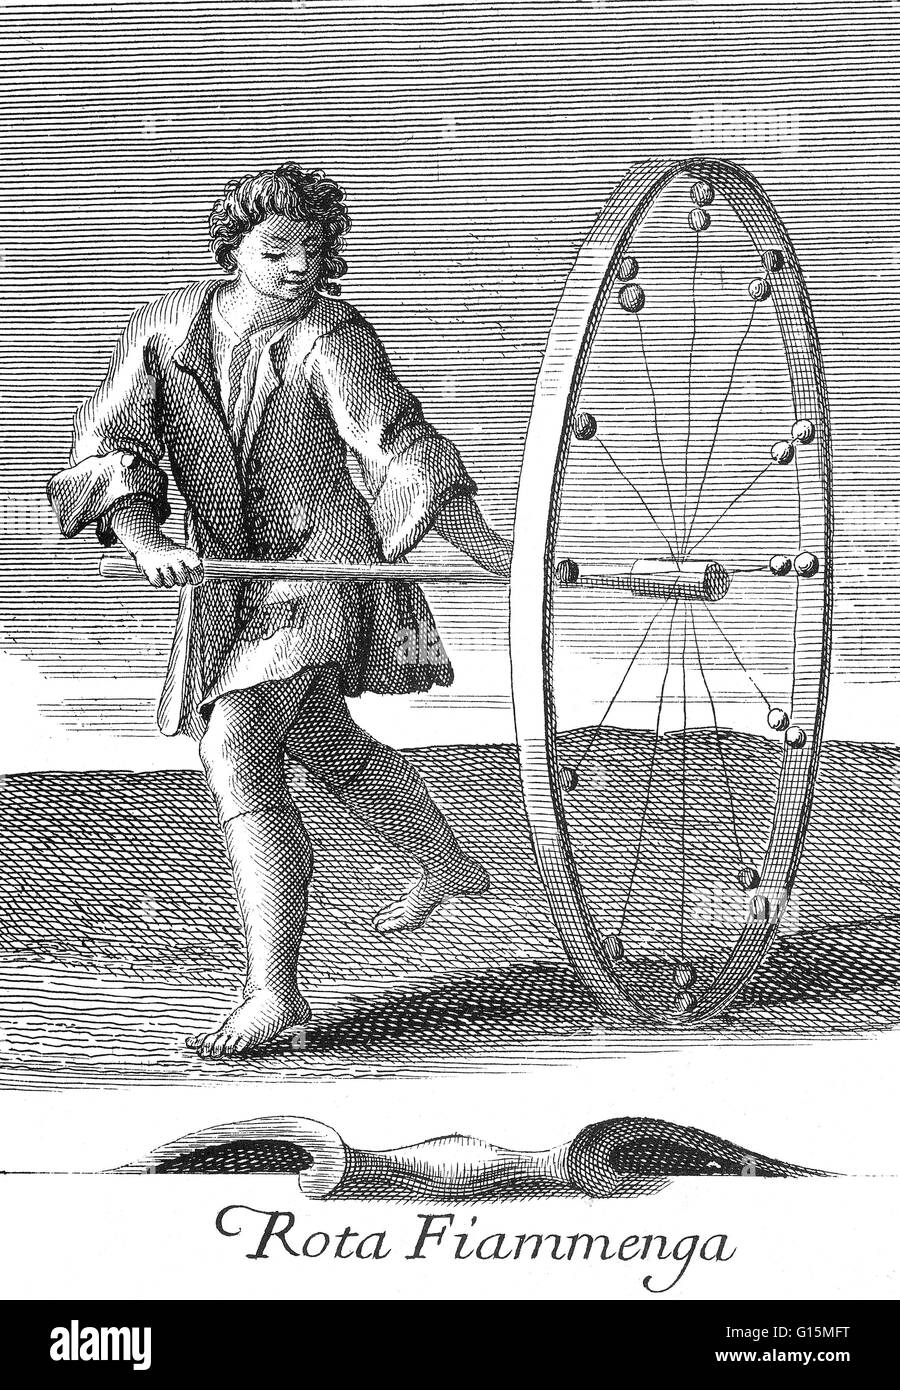 Toy wheel used by children in Flanders, 1723. Hoop rolling is both a sport and a child's game in which a large hoop is rolled along the ground, generally by means of an implement wielded by the player. The aim of the game is to keep the hoop upright for l Stock Photo